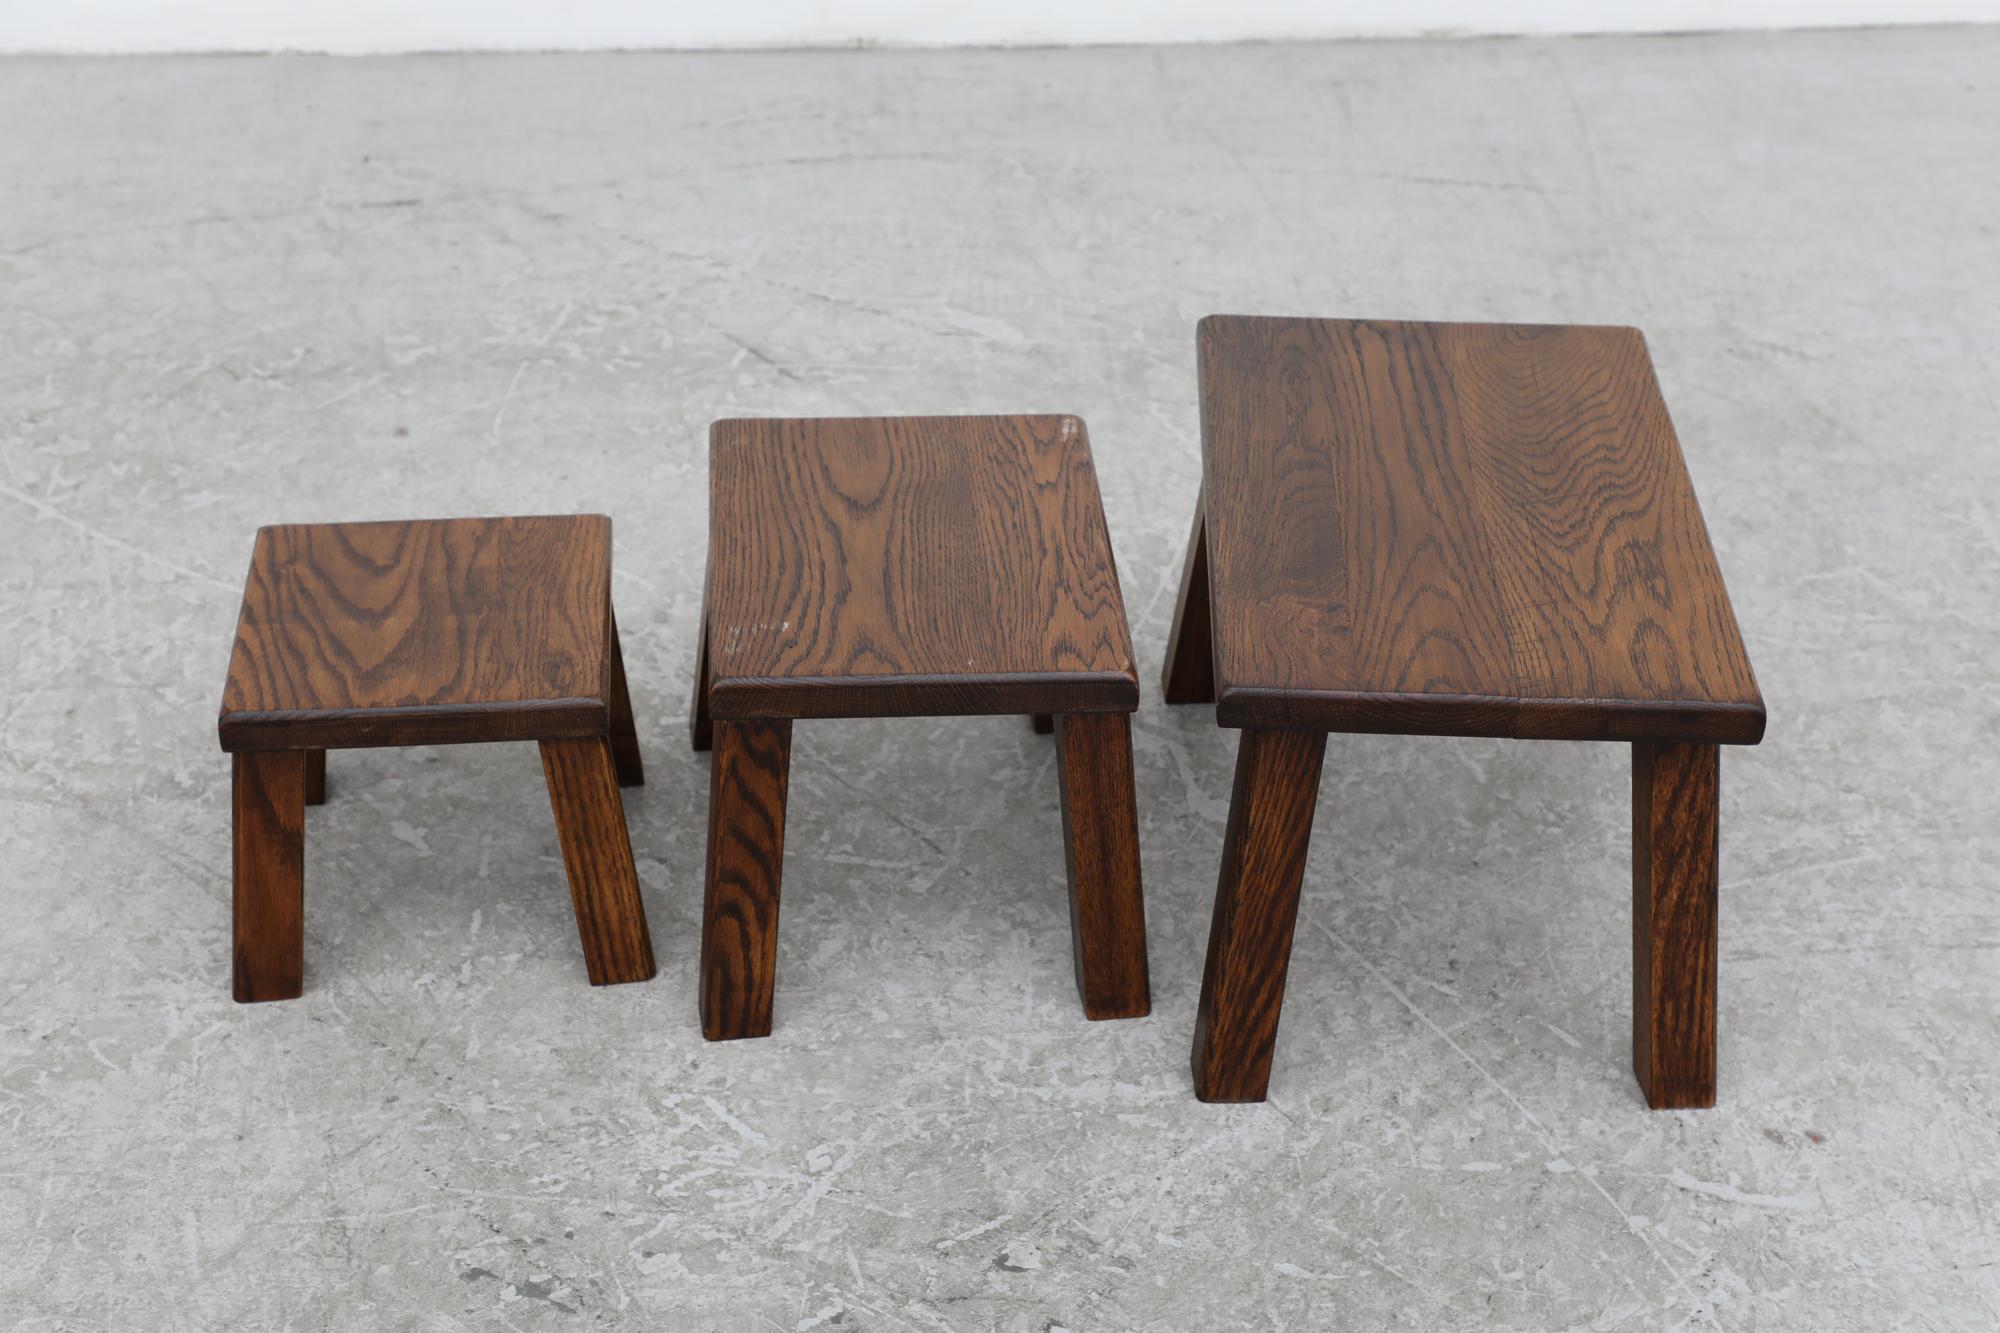 Pierre Chapo Inspired Dark Oak Brutalist Nesting Tables w/ Thick Angled Legs For Sale 3